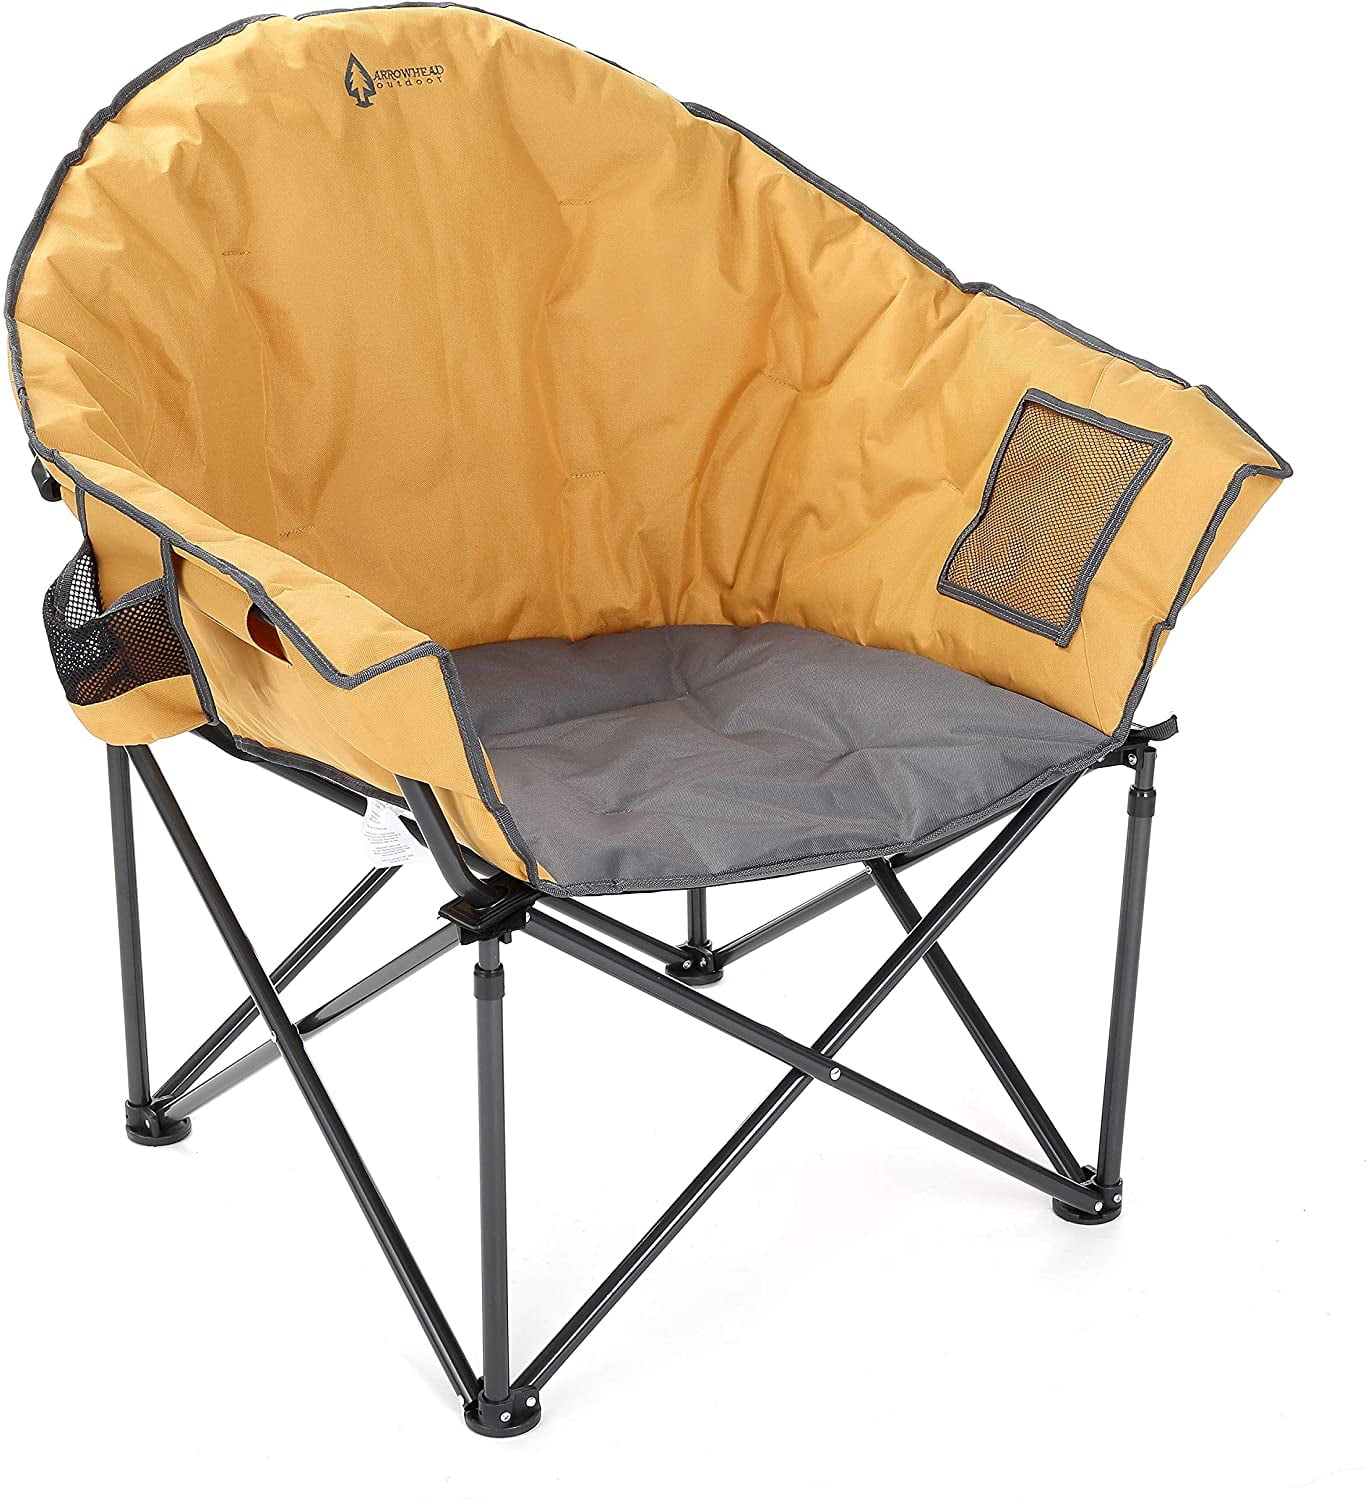 moon camping chair